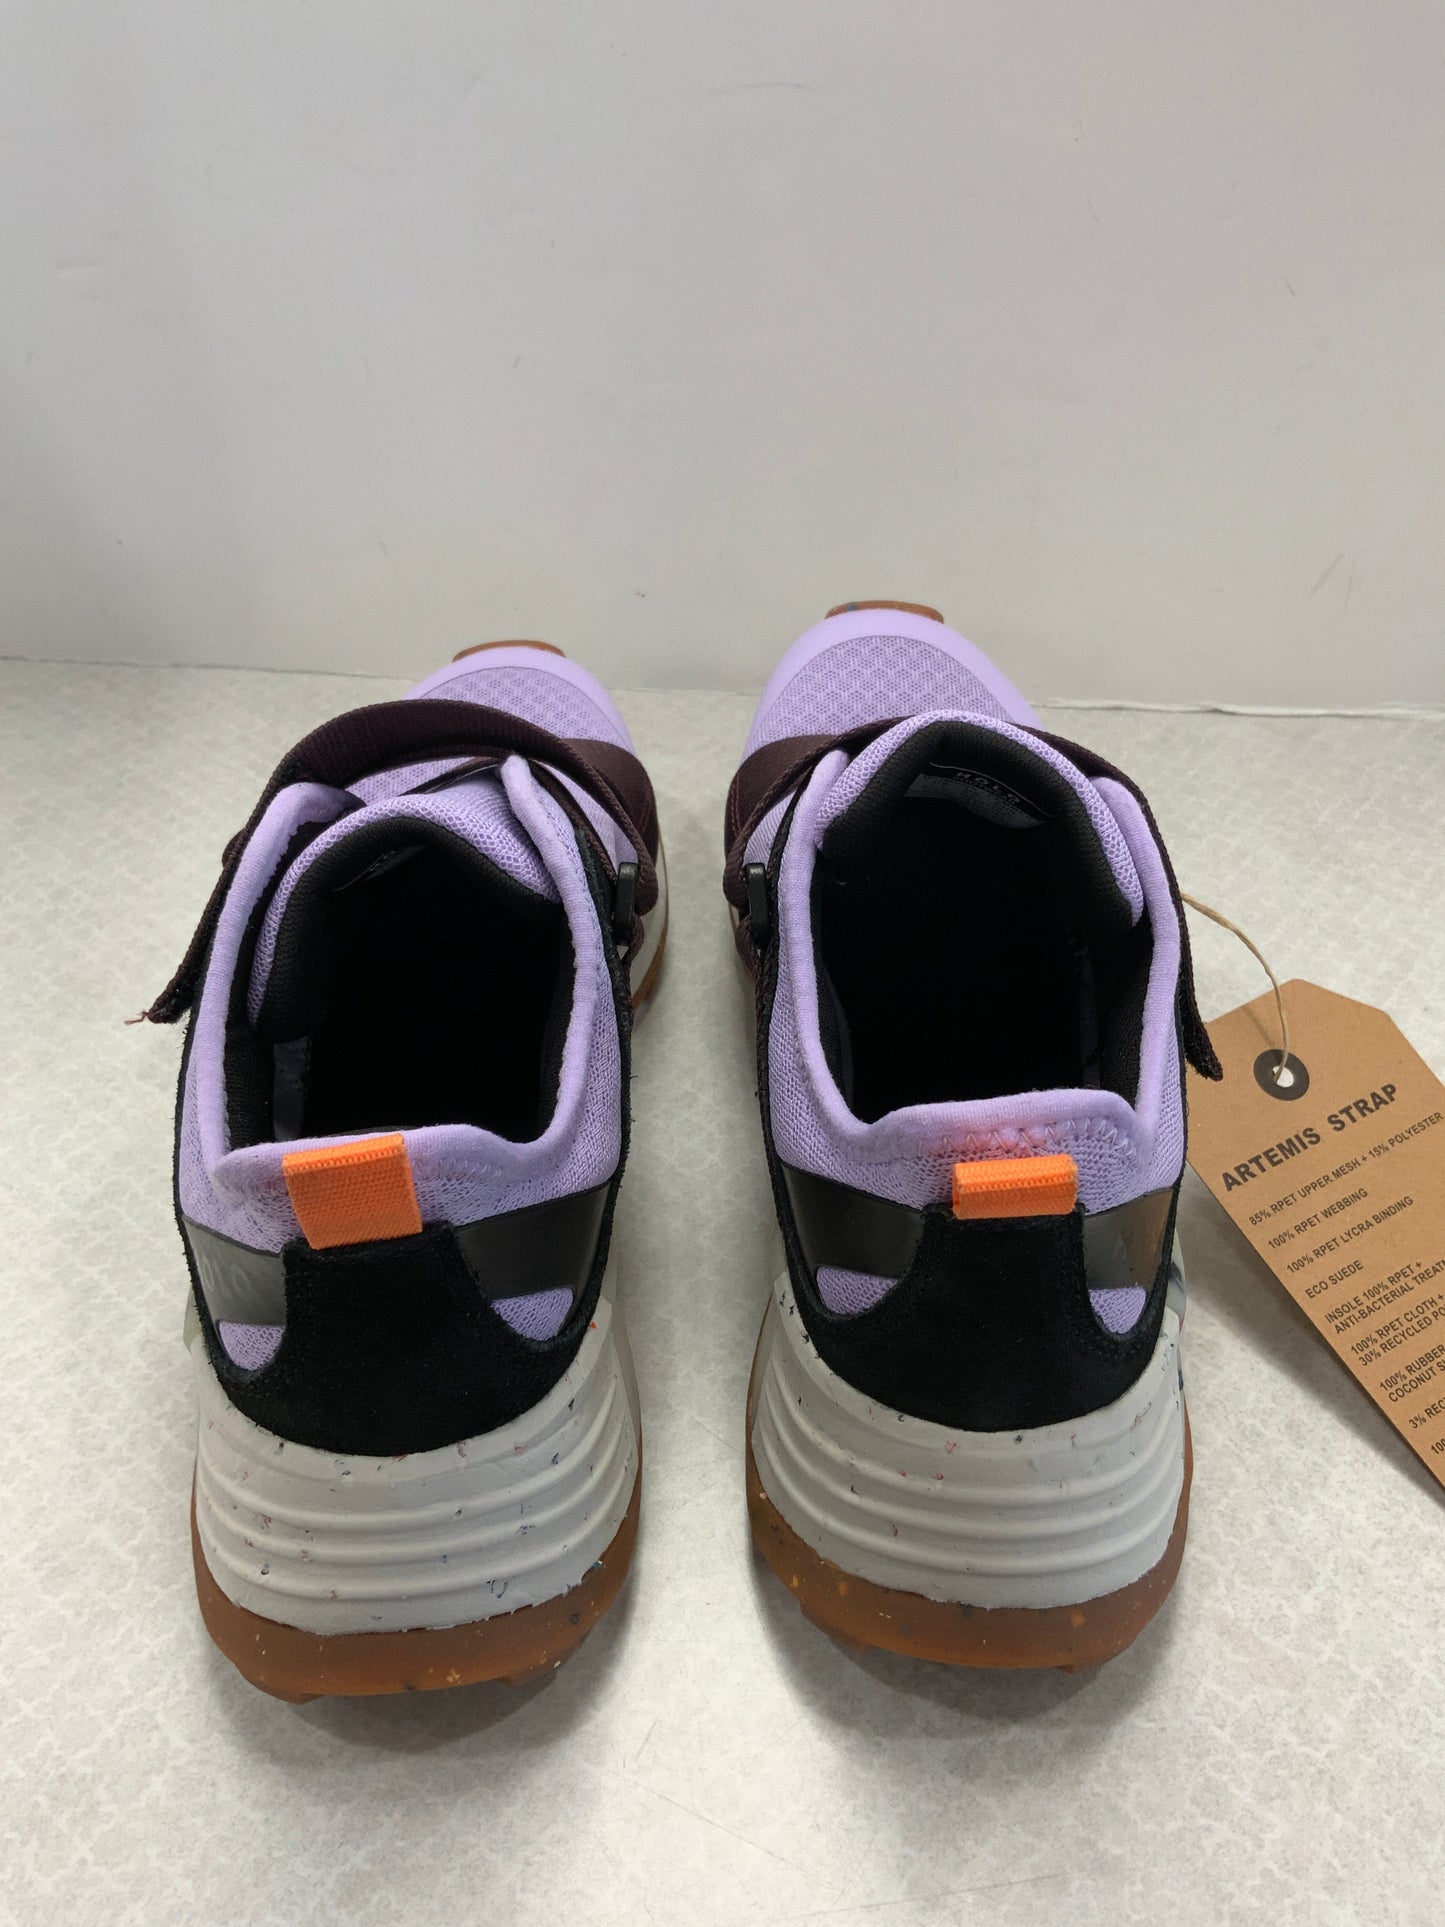 Purple Shoes Sneakers Cmb, Size 7.5